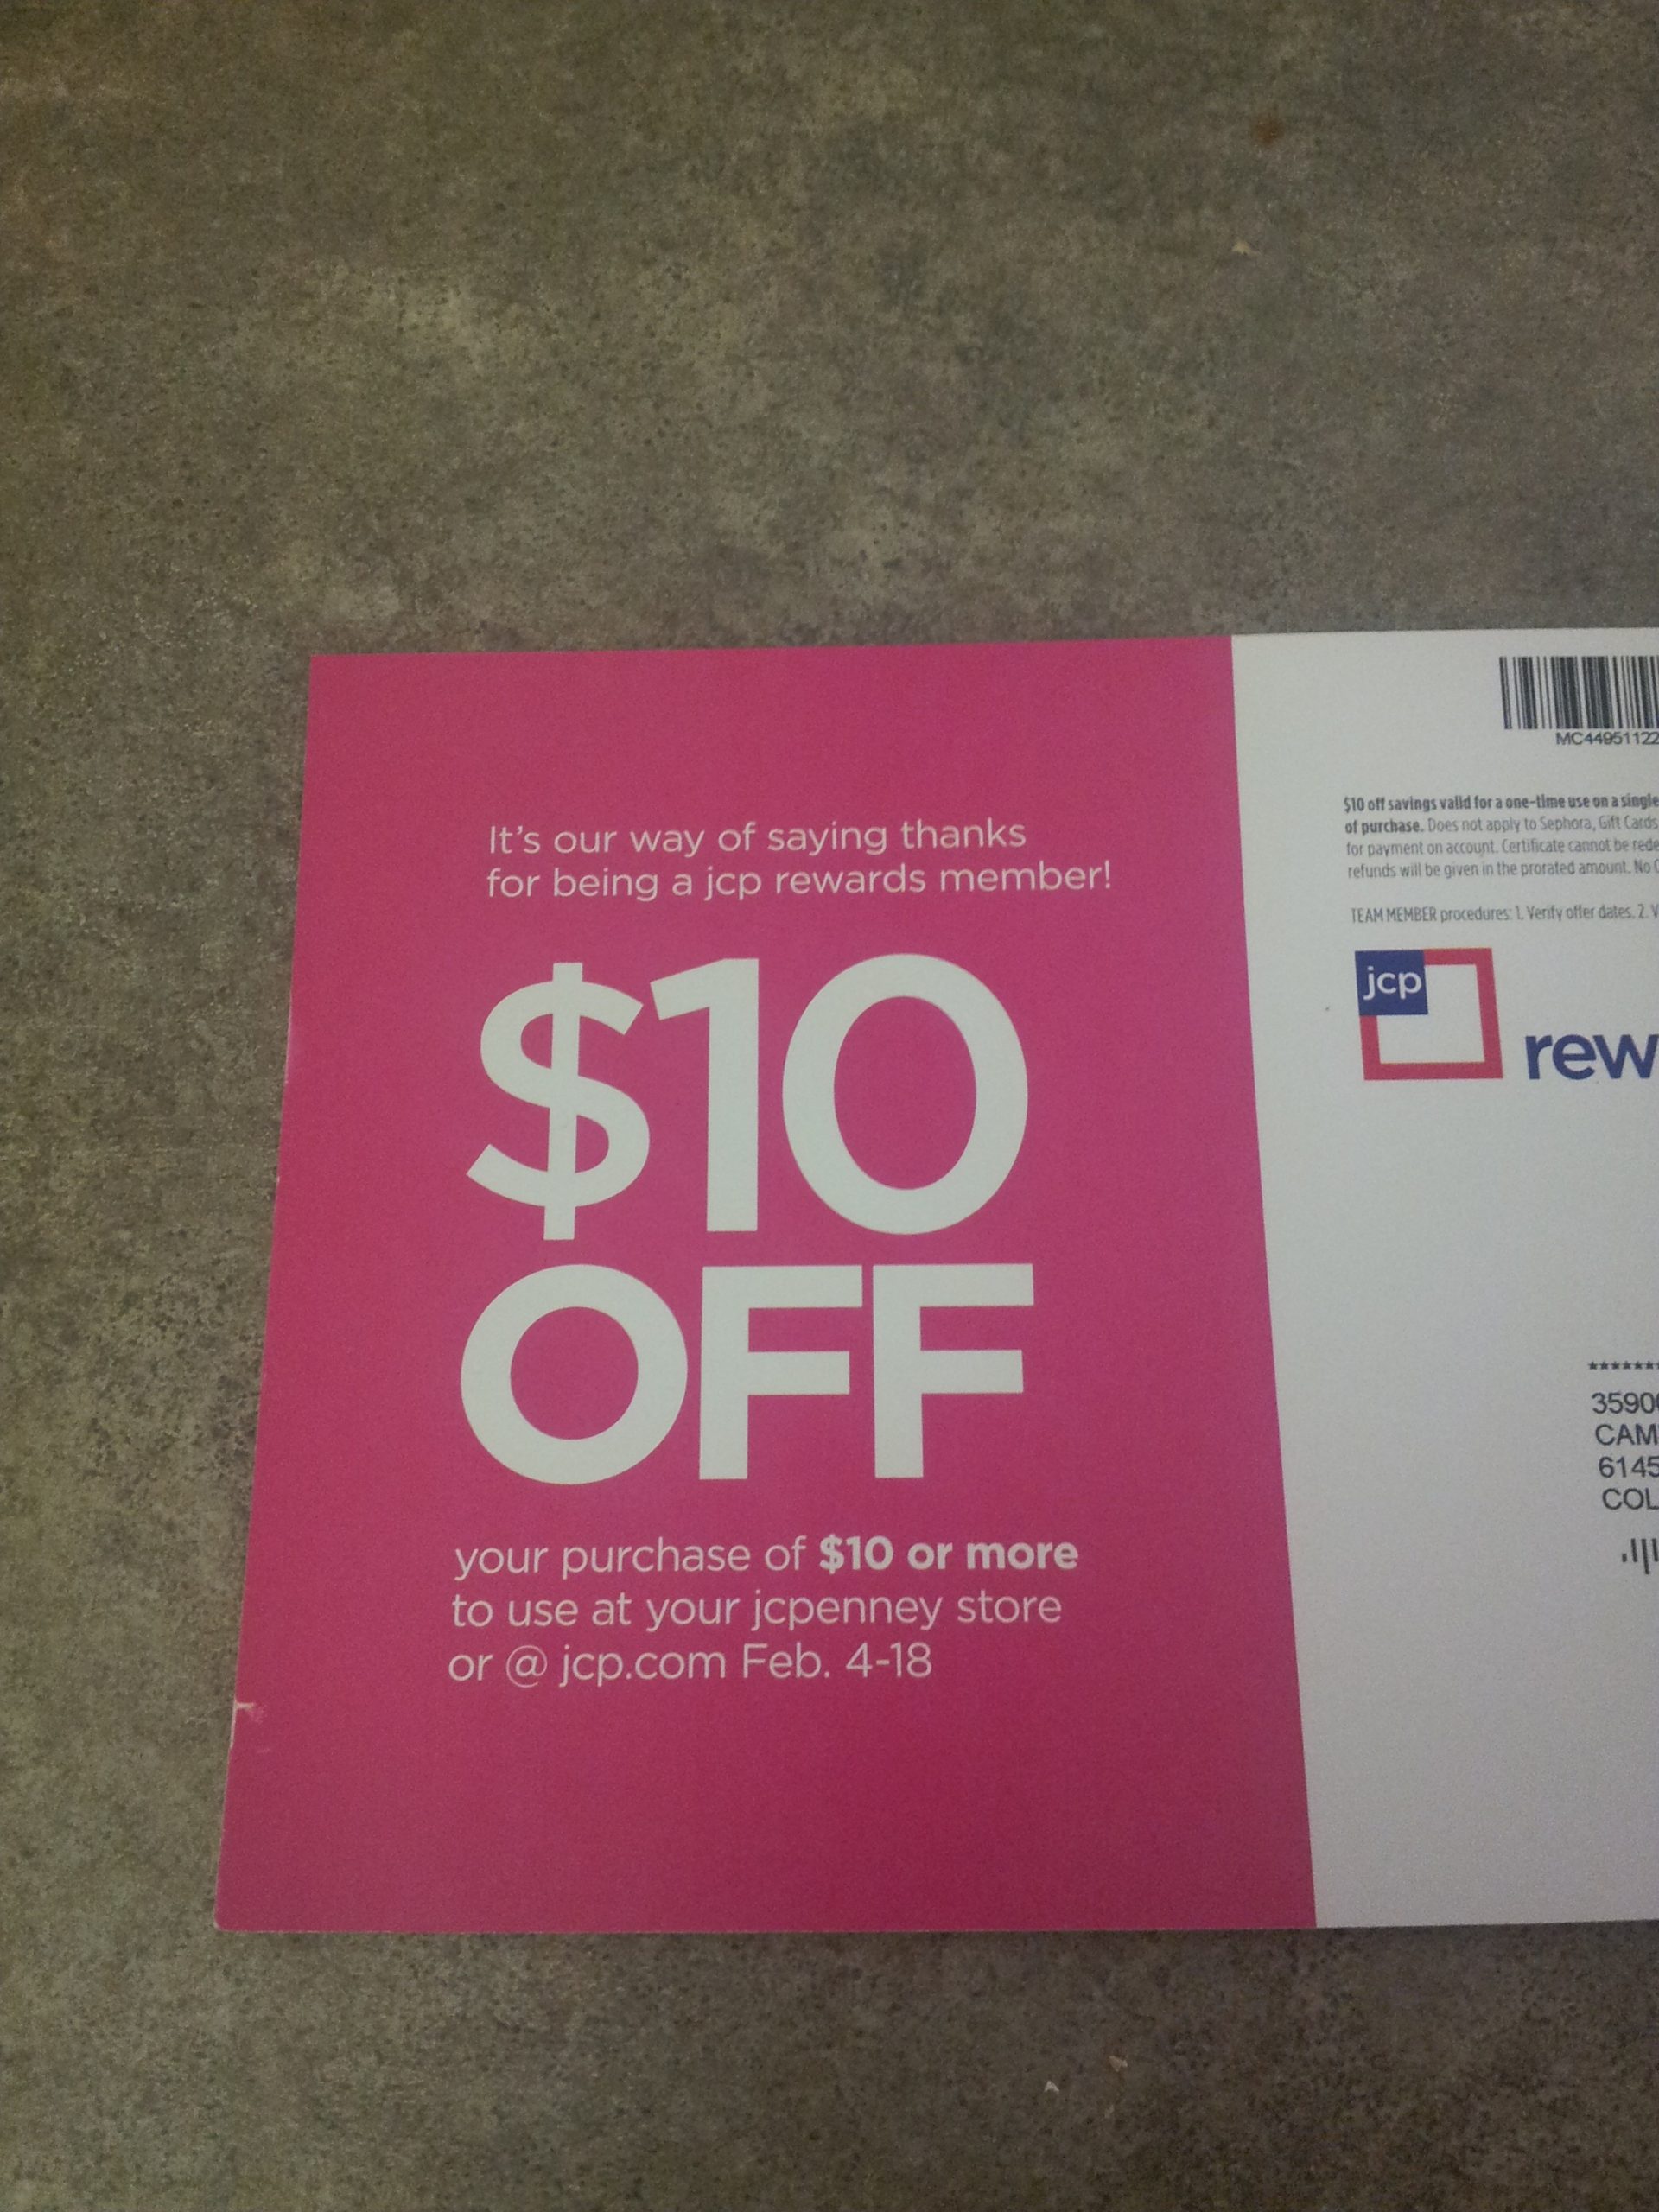 check-your-mail-10-off-10-purchase-at-jcpenney-coupon-freebies2deals